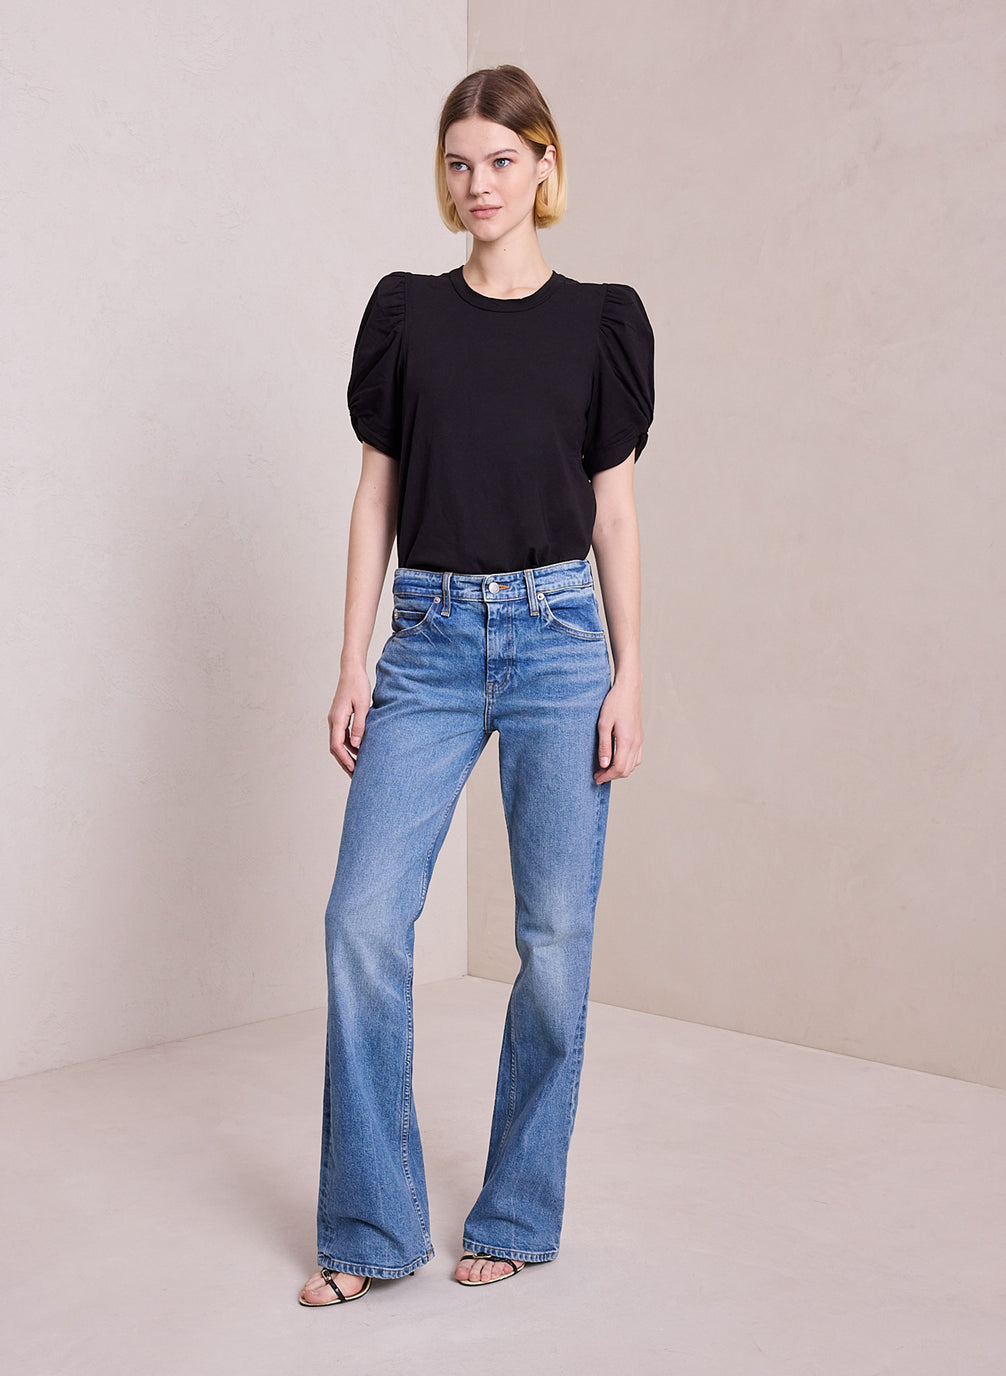 front view of woman wearing black puff sleeve tshirt and light blue wash denim jeans